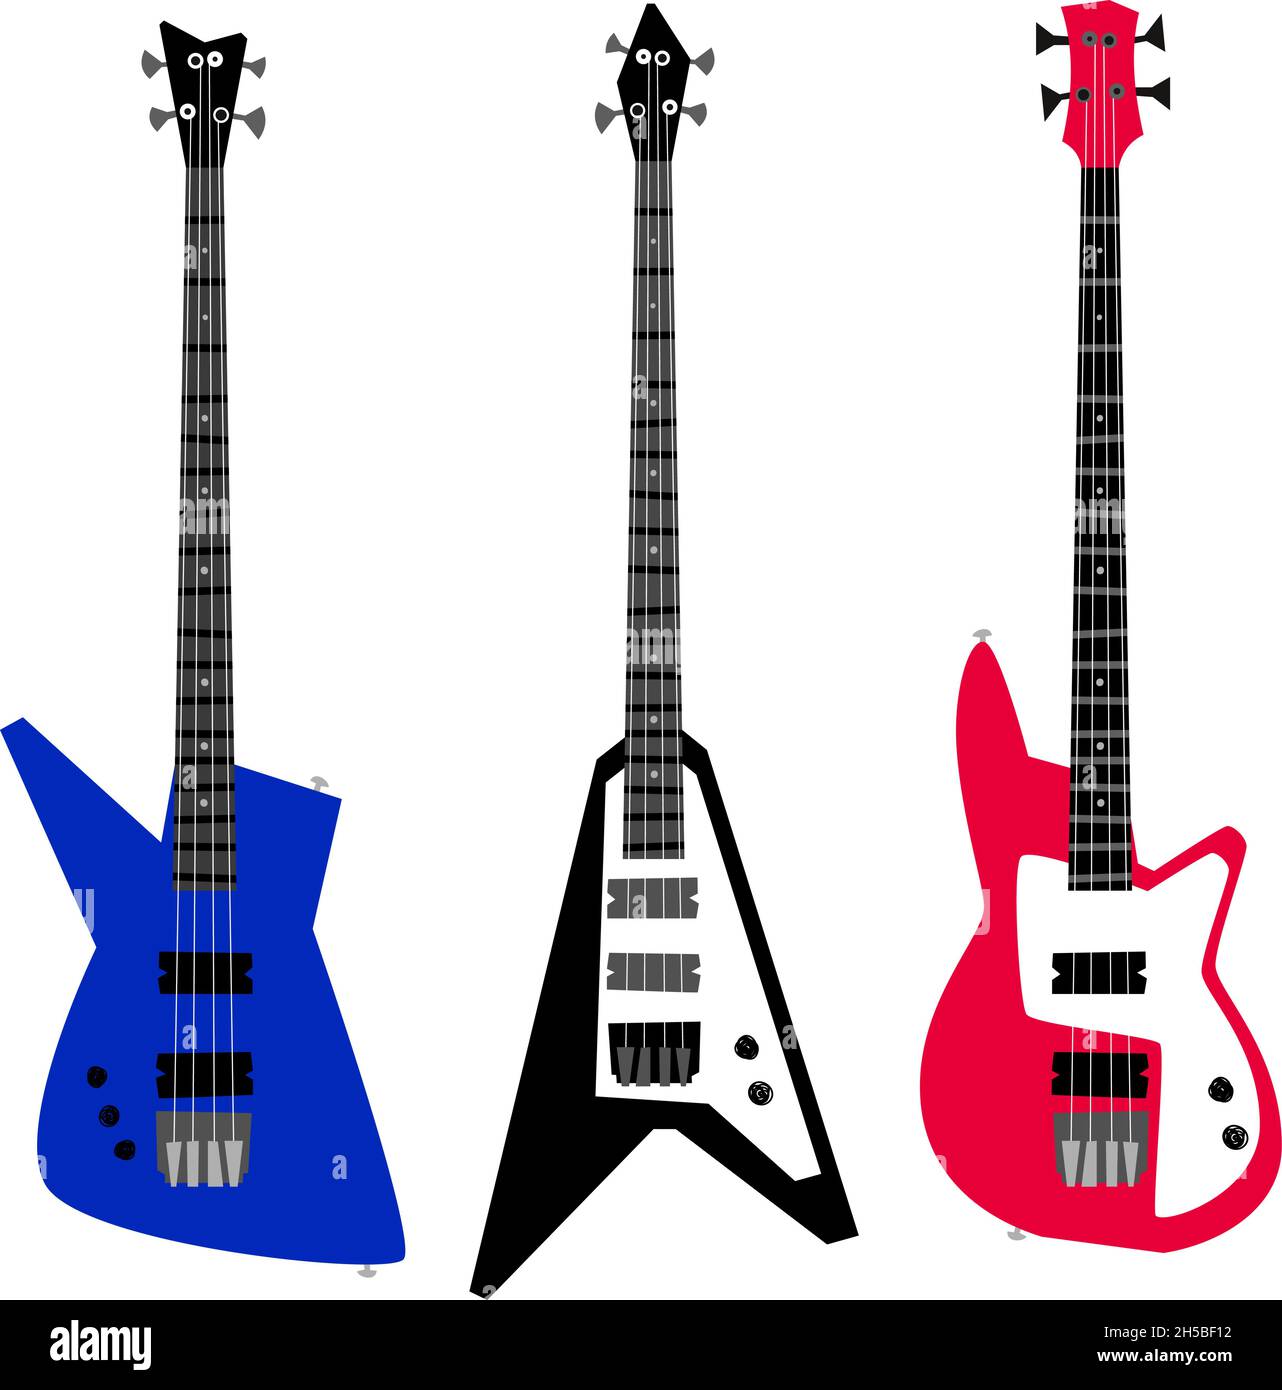 Electric guitar set. Cartoon musical instruments for playing rock and metal songs on concert, vector illustration of work objects for musicians isolated on white background Stock Vector